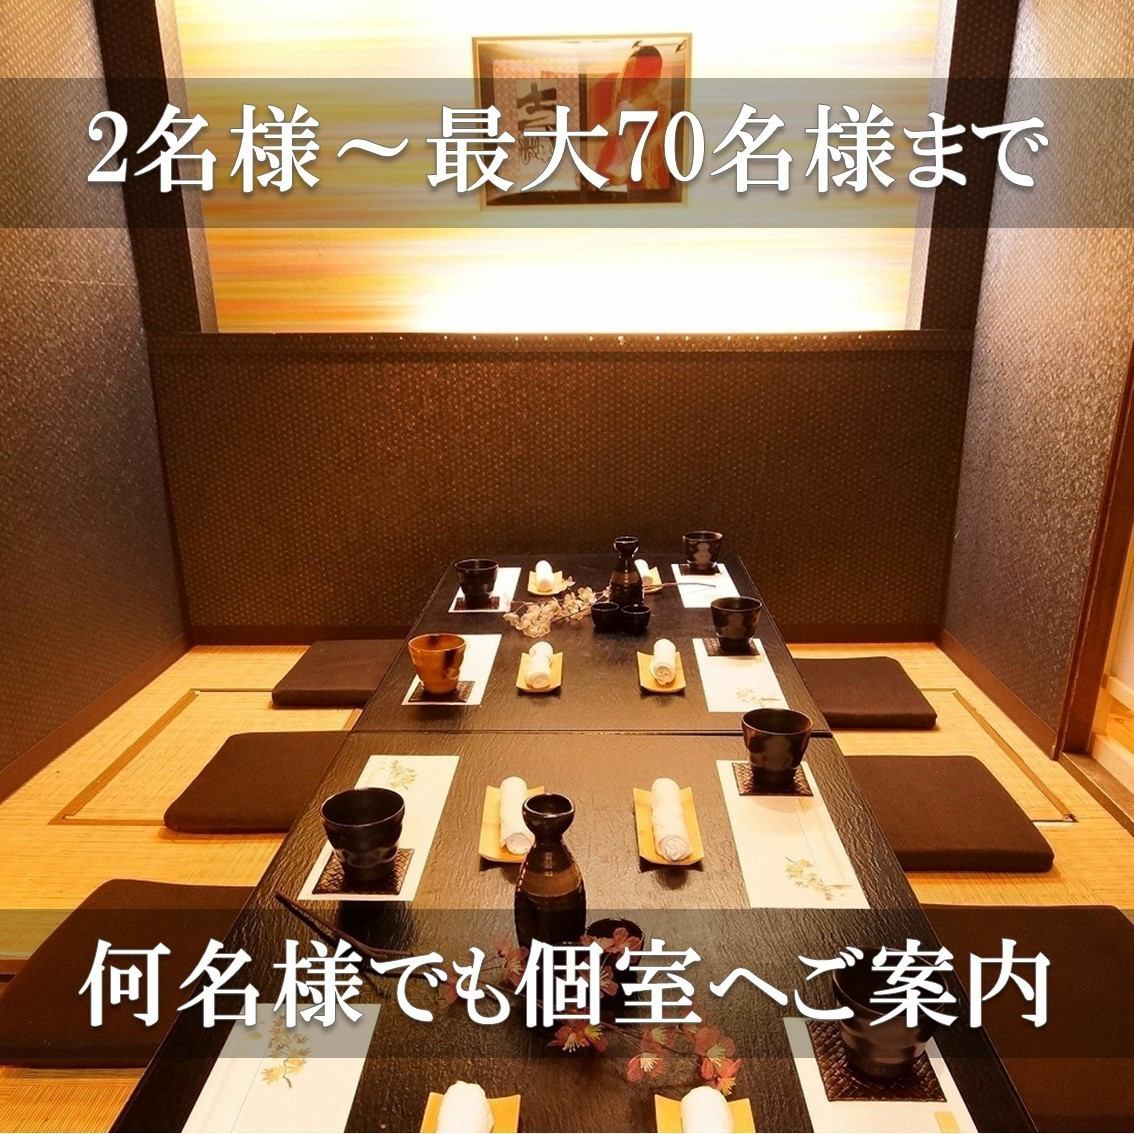 [Completely equipped with private rooms] Luxury!! Courses starting from 3,500 yen including all-you-can-drink seafood assortment